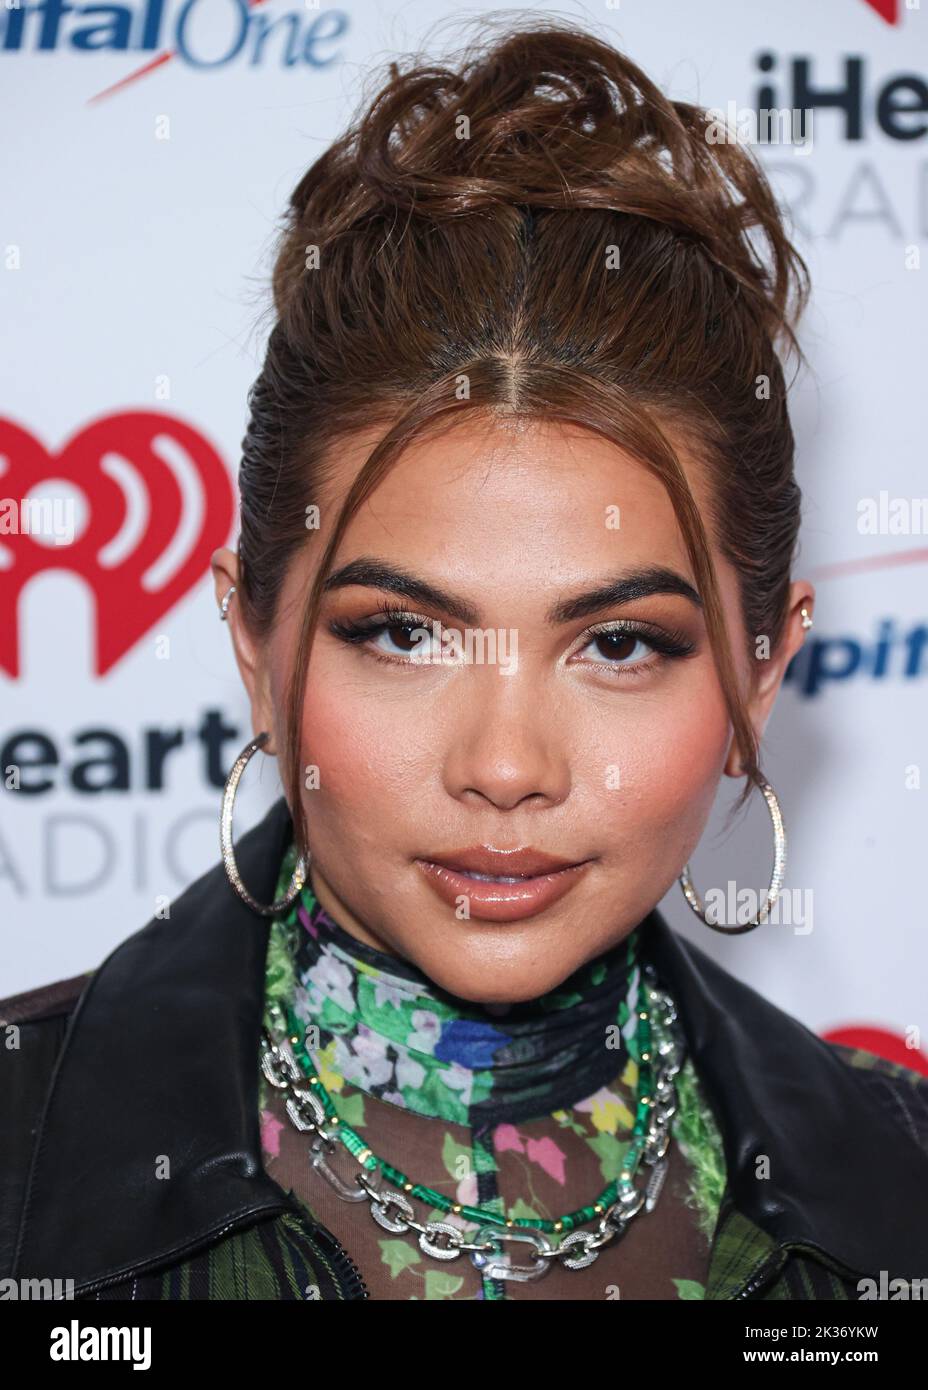 LAS VEGAS, NEVADA, USA - SEPTEMBER 24: Hayley Kiyoko poses in the press room at the 2022 iHeartRadio Music Festival - Night 2 held at the T-Mobile Arena on September 24, 2022 in Las Vegas, Nevada, United States. (Photo by Xavier Collin/Image Press Agency) Stock Photo